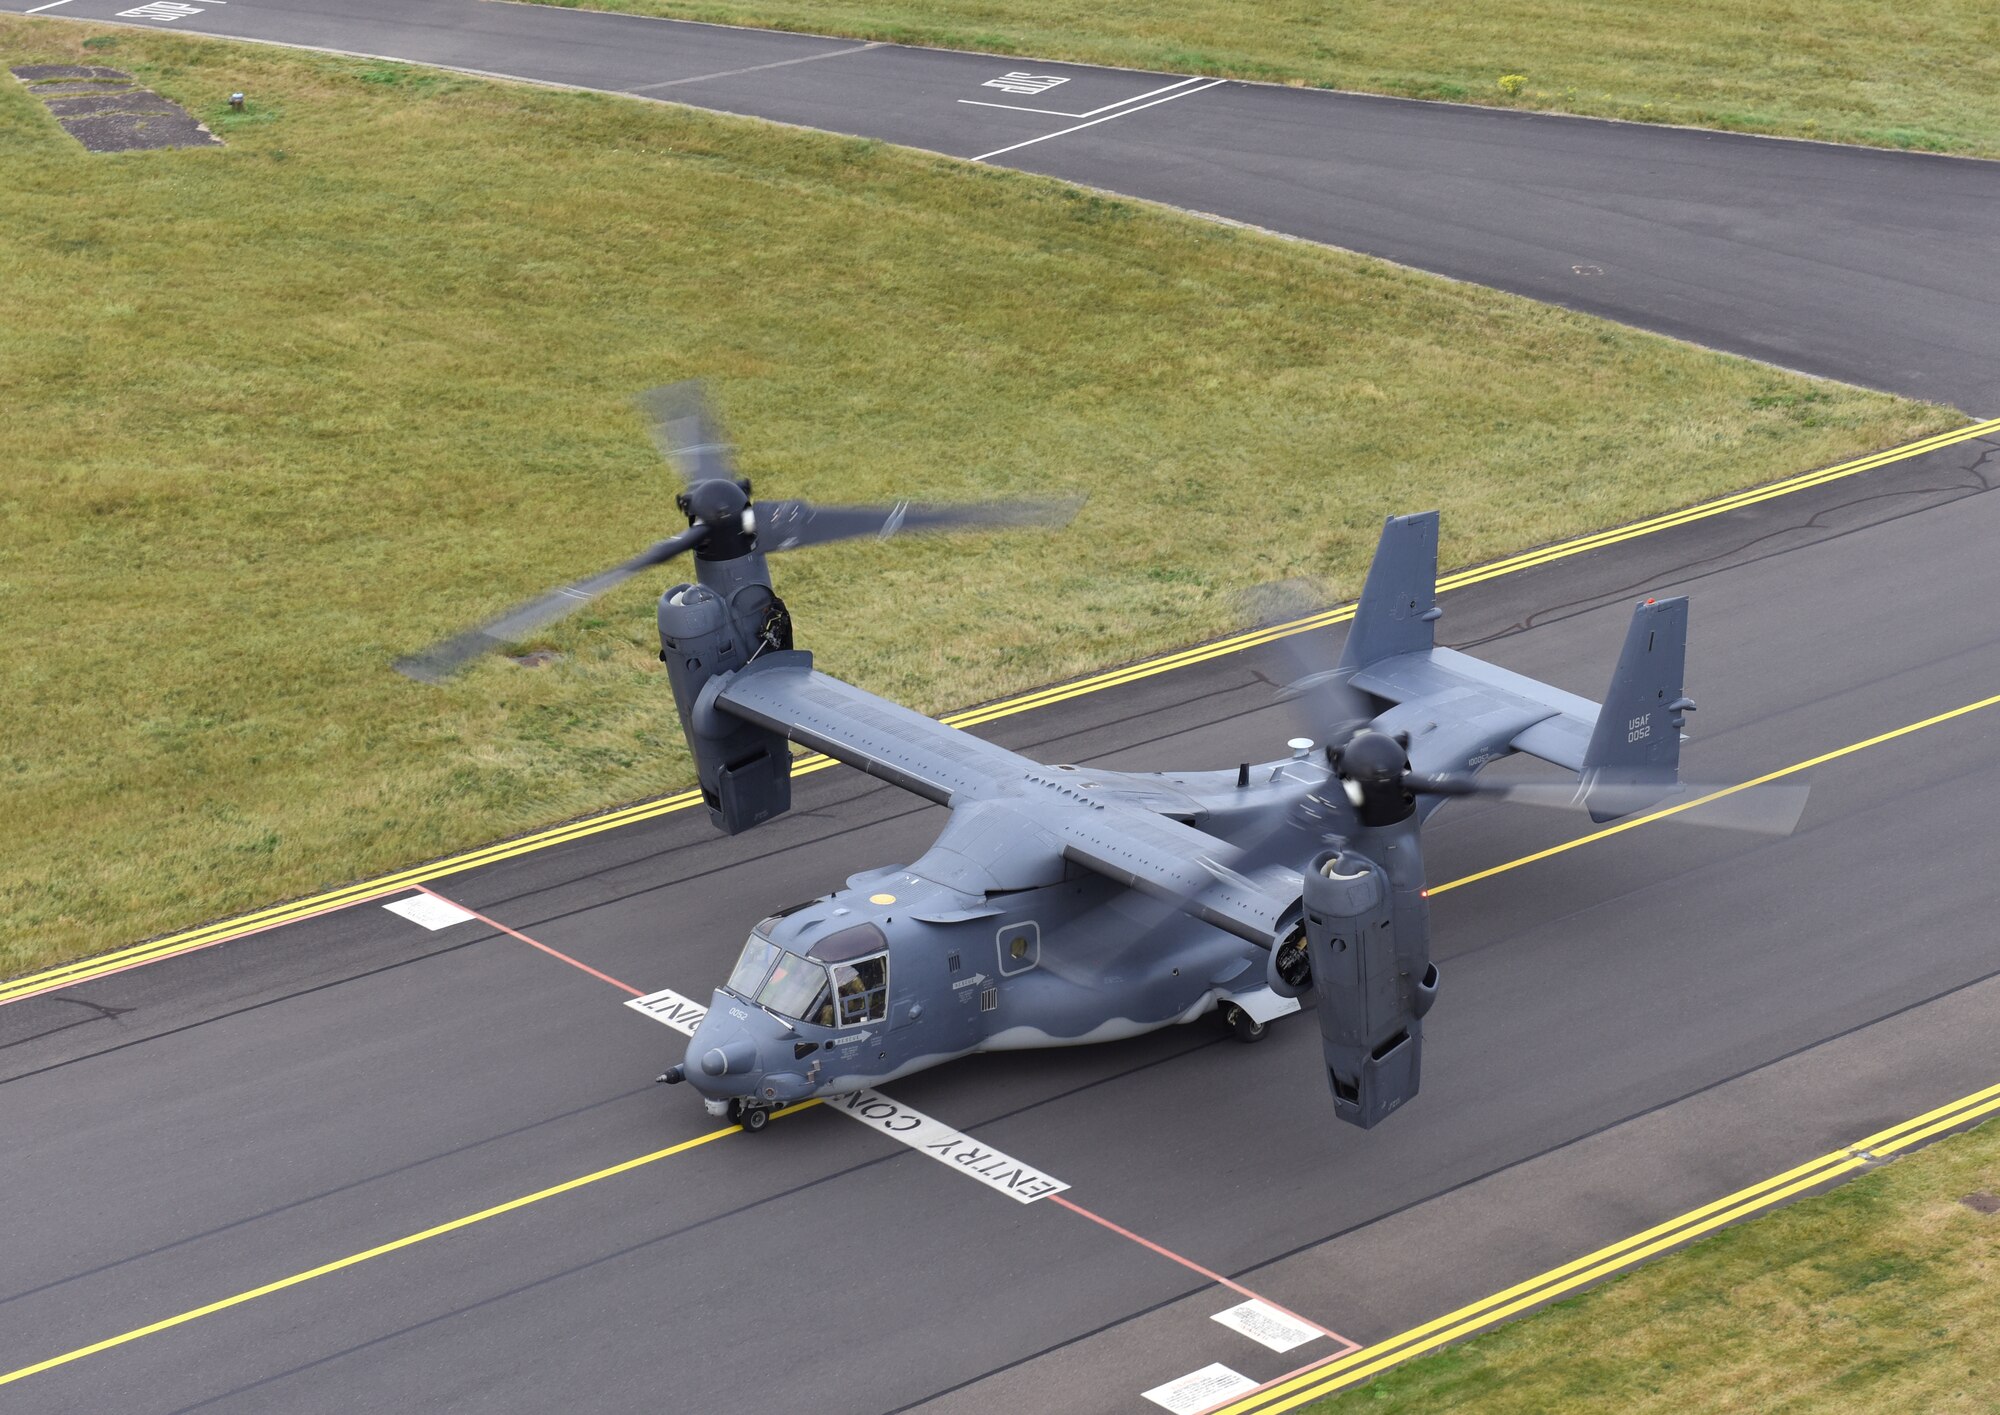 A U.S. Air Force CV-22B Osprey aircraft assigned to the 352nd Special Operations Wing taxis in front of the air traffic control tower on its way to lead an “elephant walk” at Royal Air Force Mildenhall, England, Sept. 13, 2021. An elephant walk is a term used by the U.S. Air Force when multiple aircraft taxi together before takeoff. (U.S. Air Force photo by Karen Abeyasekere)